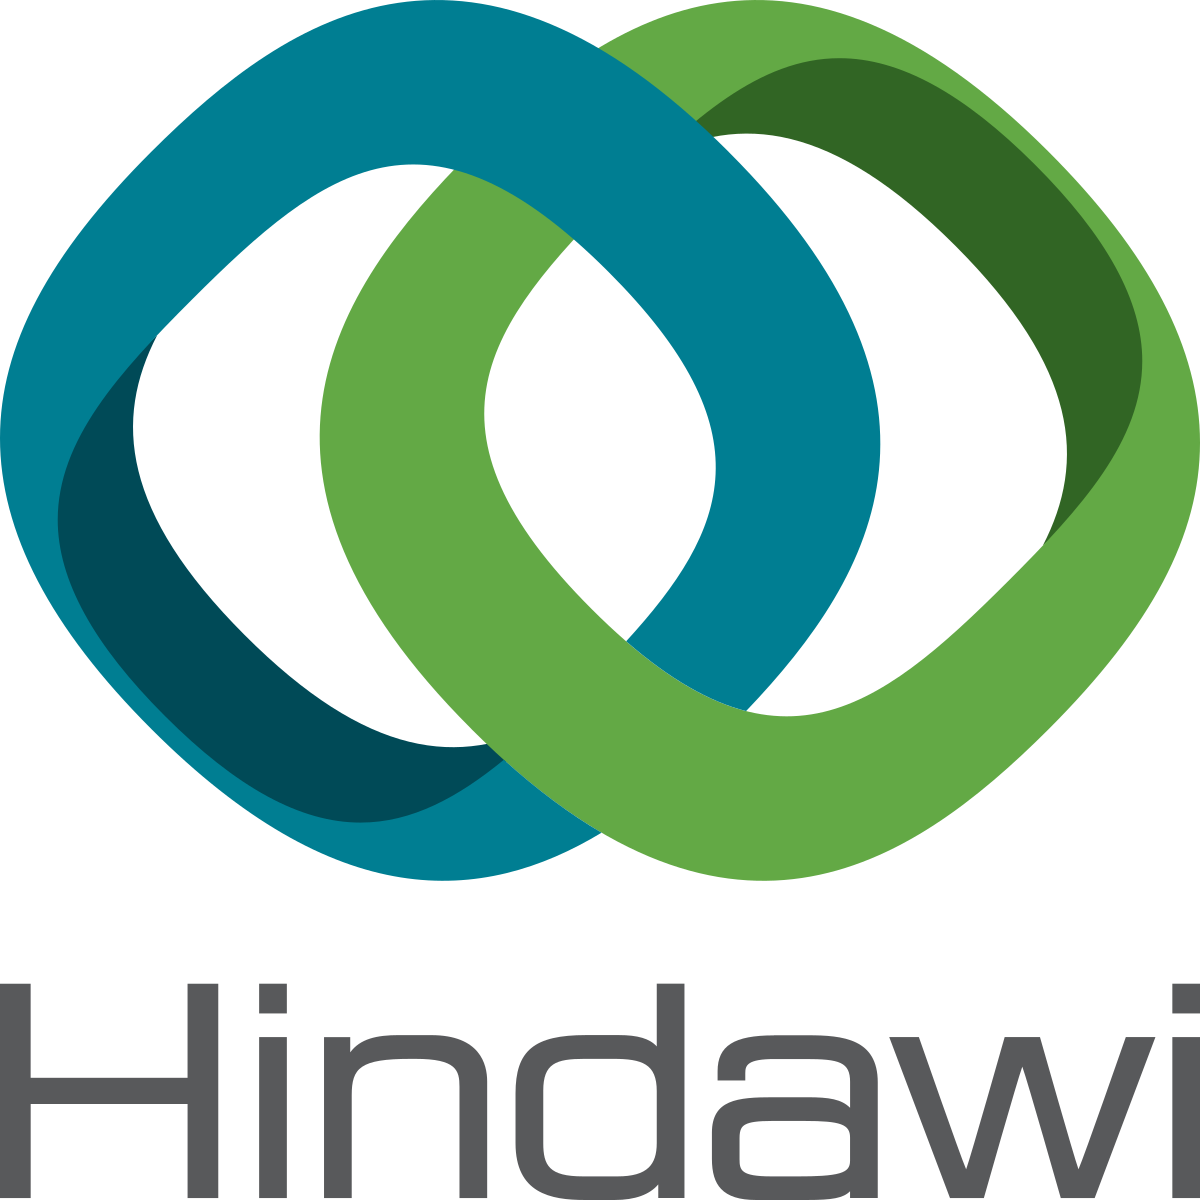 Hindawi is one of the Largest Publishers of Peer-Reviewed, Fully Open Access Journals. Click Now to find out about our Journals. View all Article Processing Charges
International Recognition.
With over 20K published article yearly.